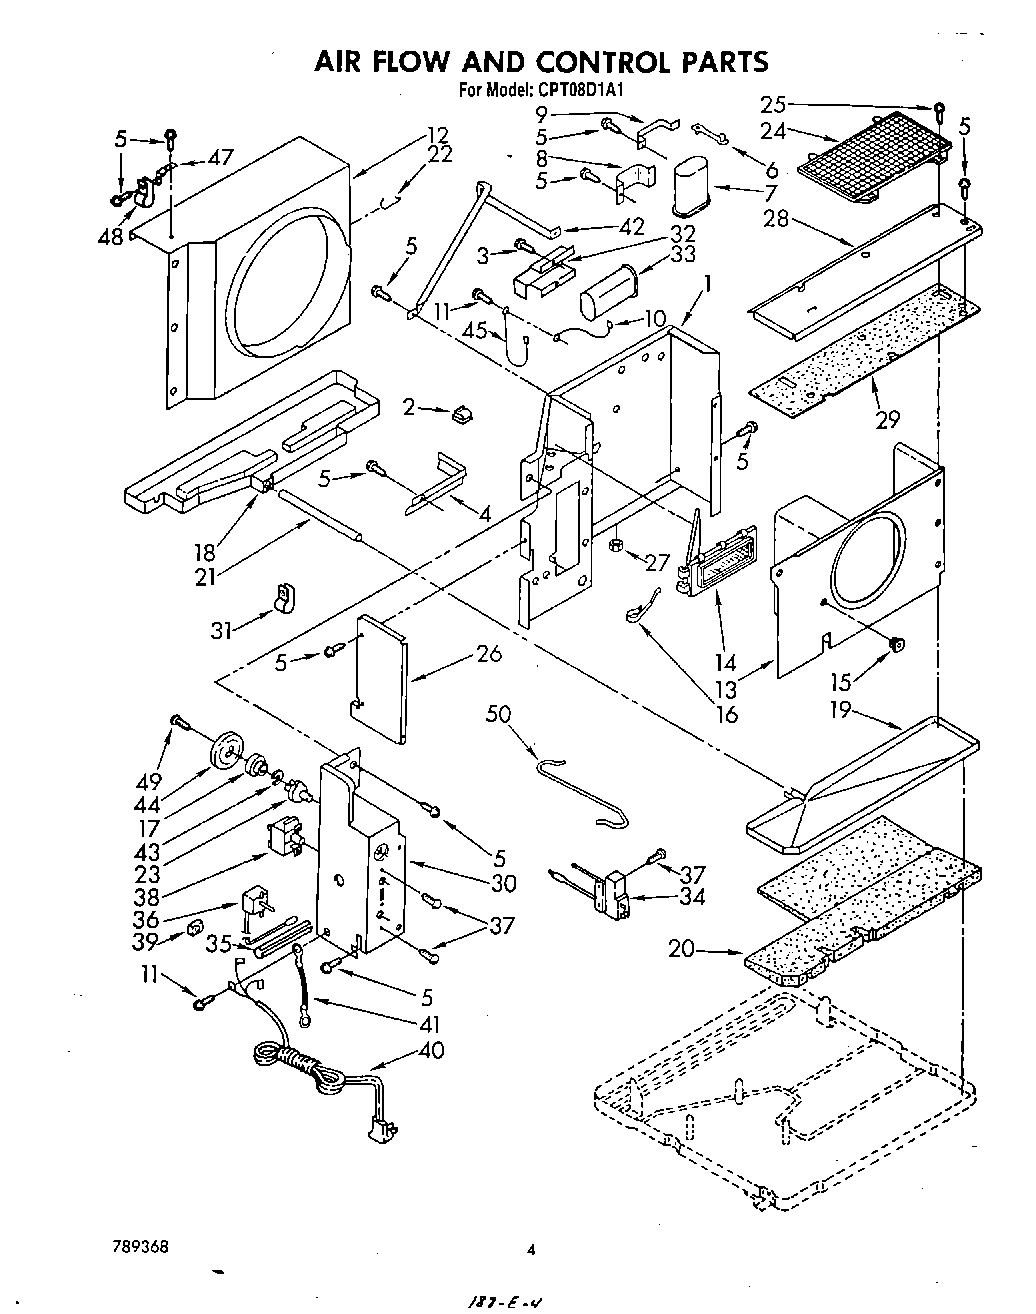 03 - AIR FLOW AND CONTROL , LIT/OPTIONAL